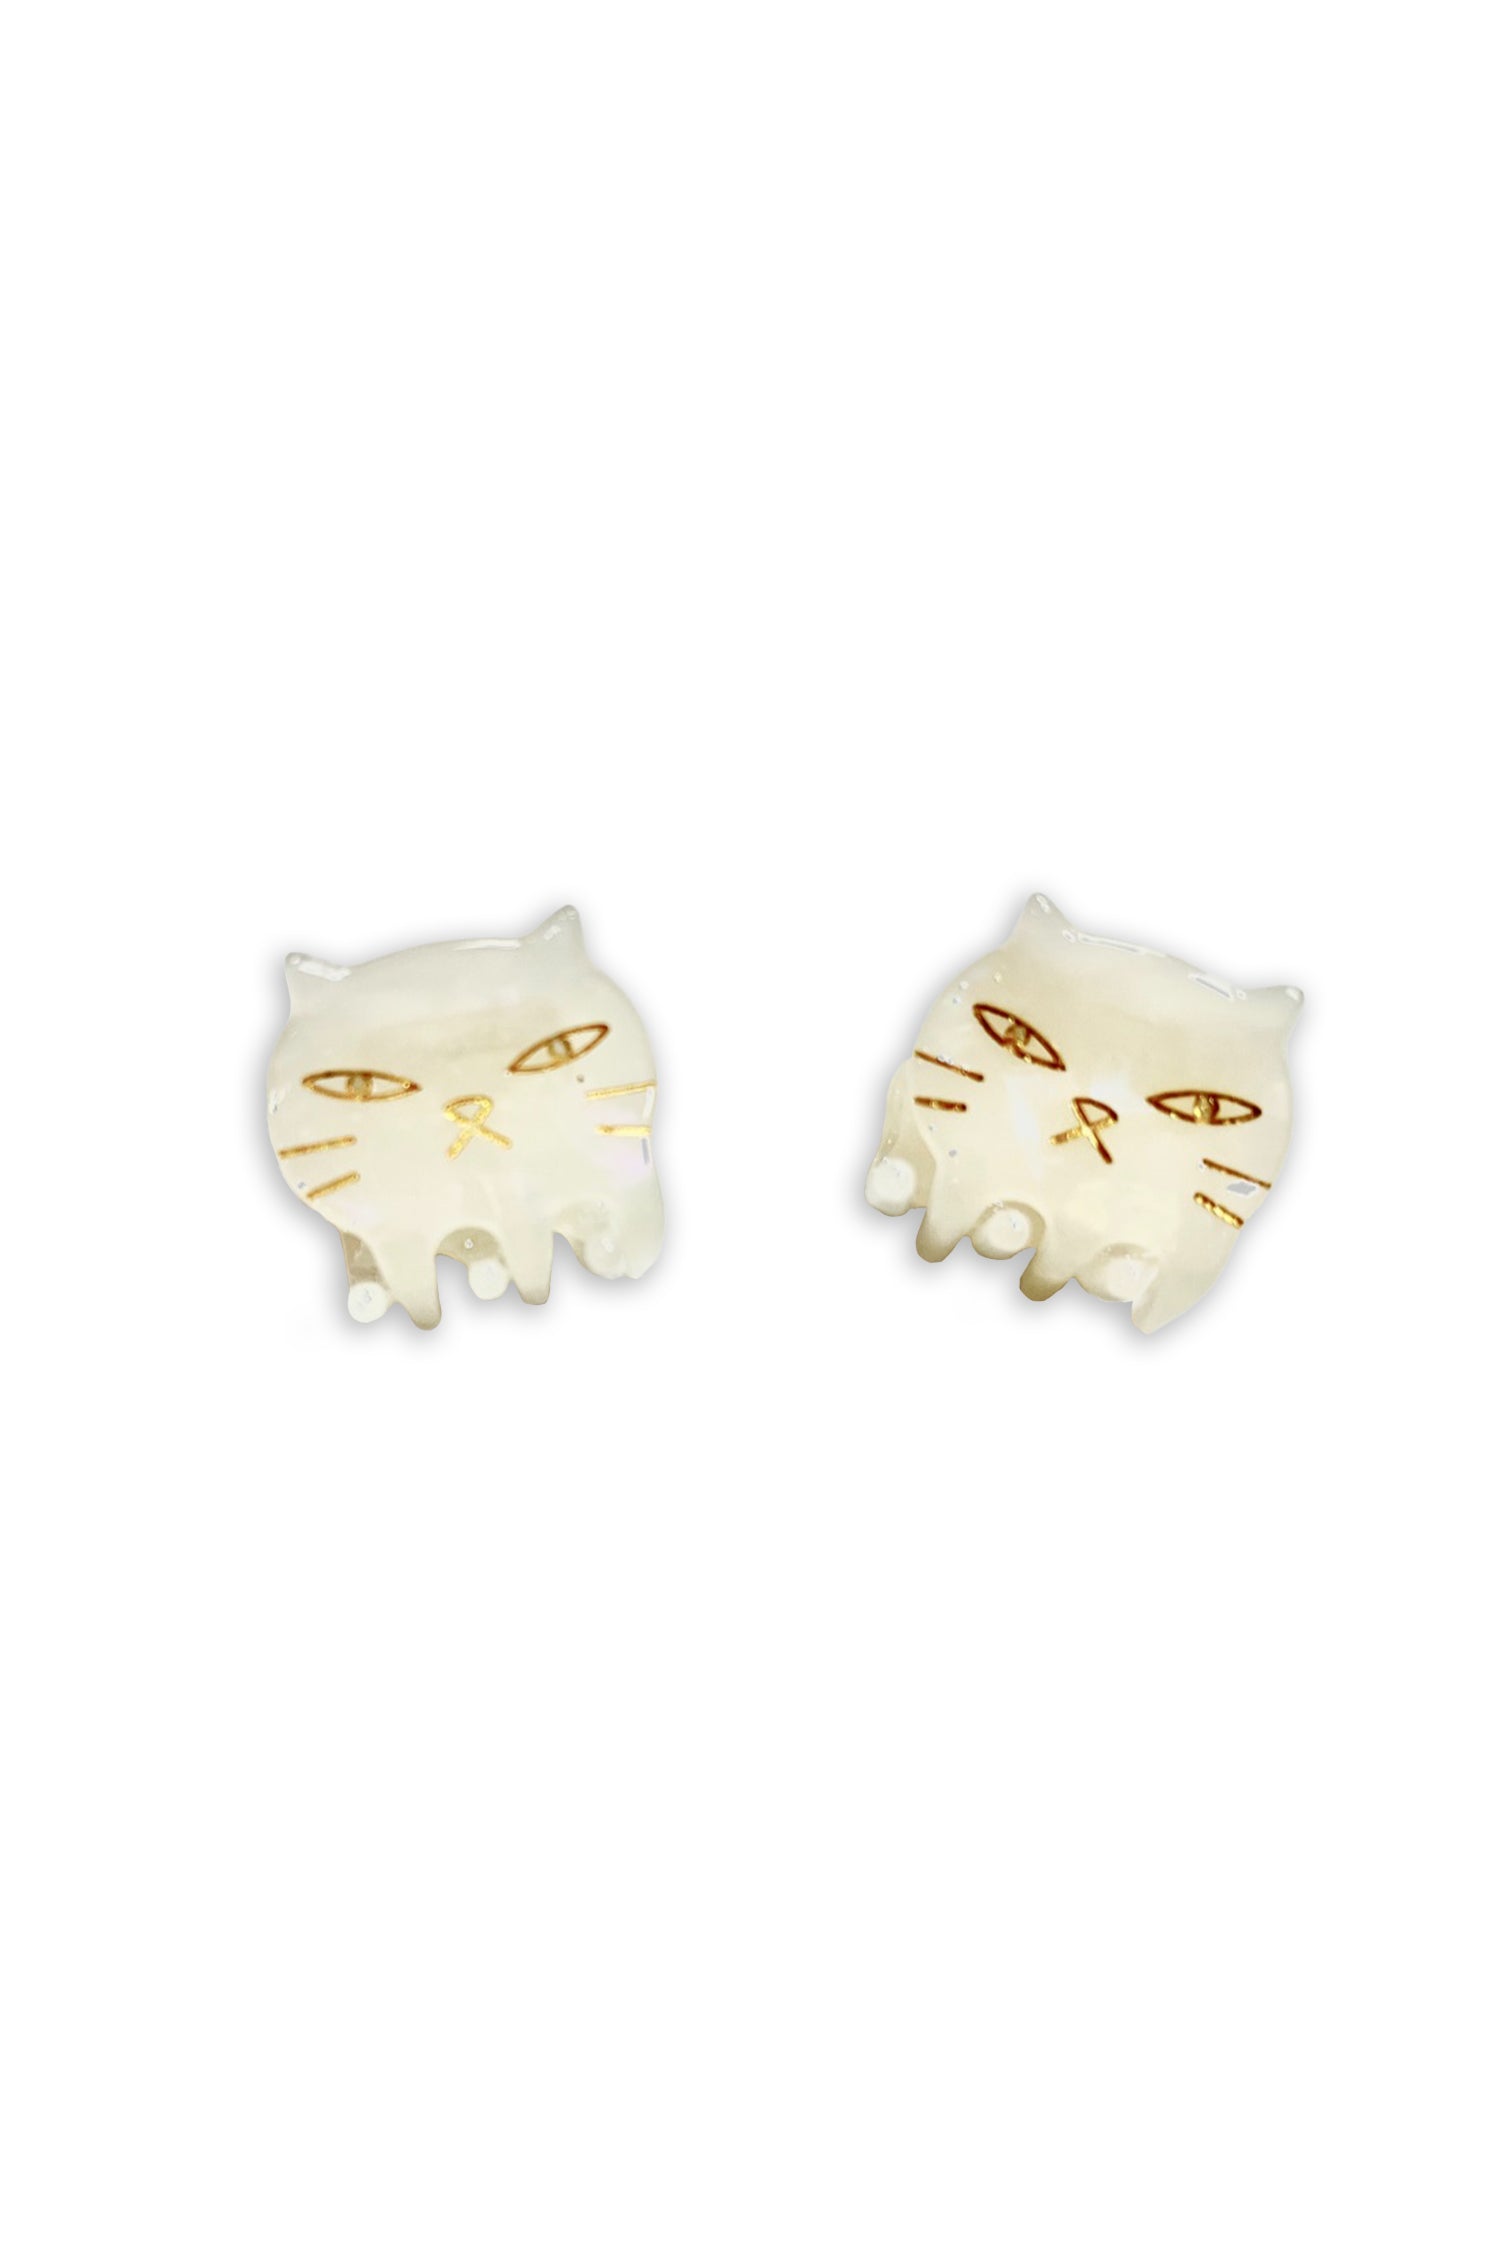 Cat Jaw Clip Pair, pearl white cat head, golden highlight, cat head used to open the hair jaw  